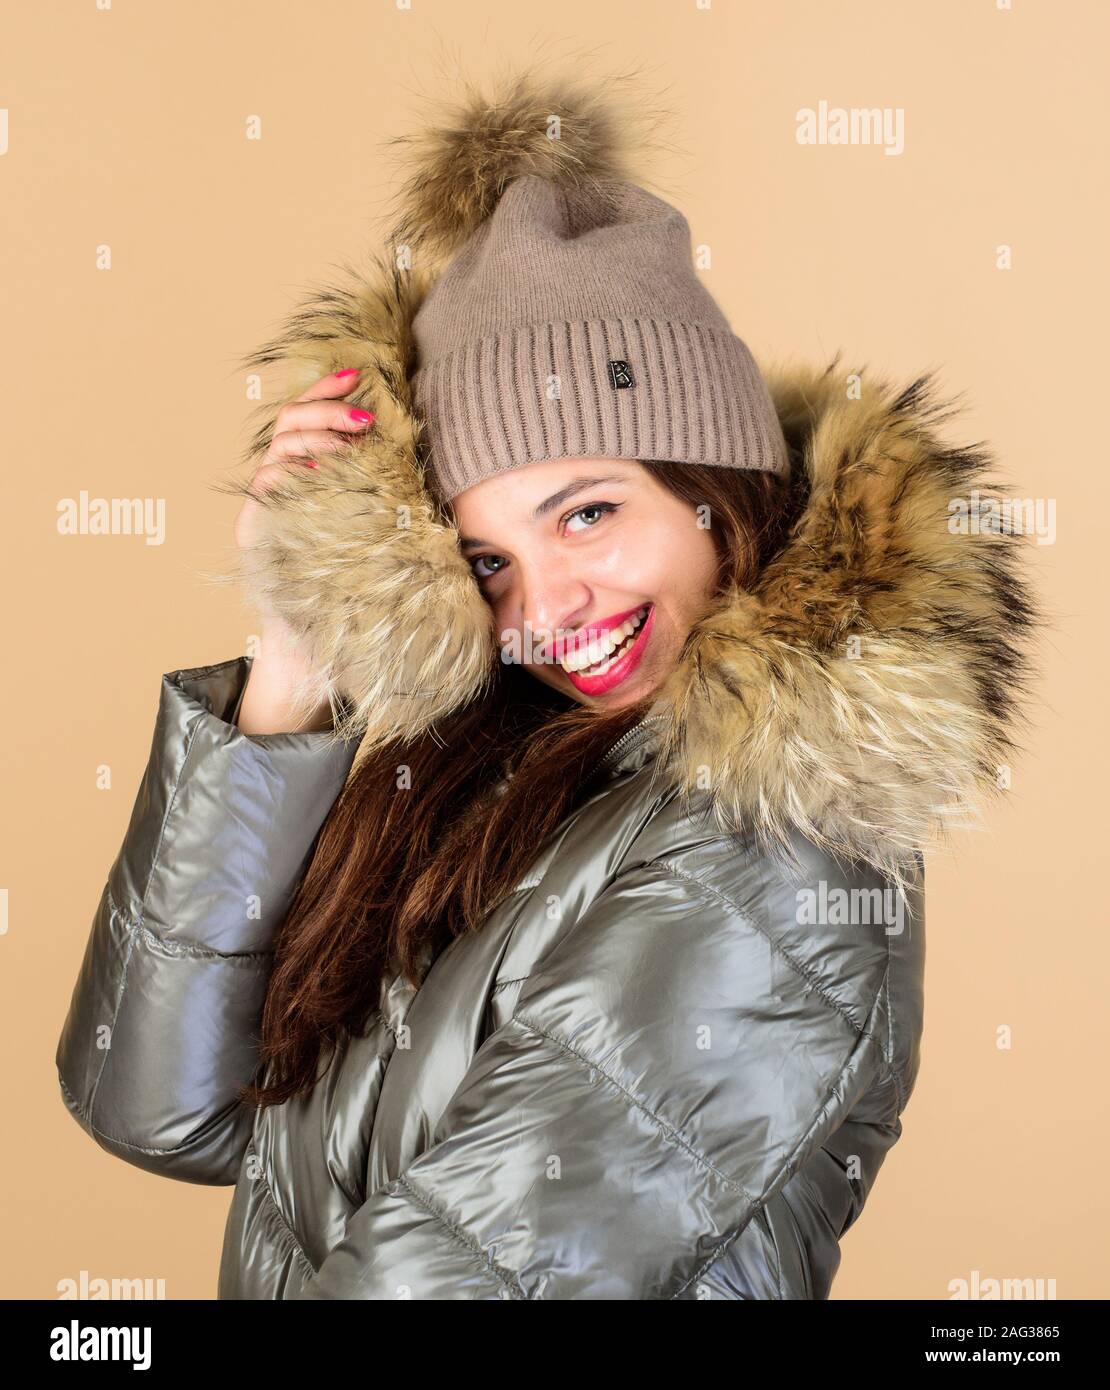 https://c8.alamy.com/comp/2AG3865/confidence-and-femininity-be-stylish-this-winter-emotional-woman-in-jacket-winter-outfit-enjoying-her-outfit-pretty-girl-wear-fashion-outfit-for-cold-weather-playful-fashionista-black-friday-2AG3865.jpg